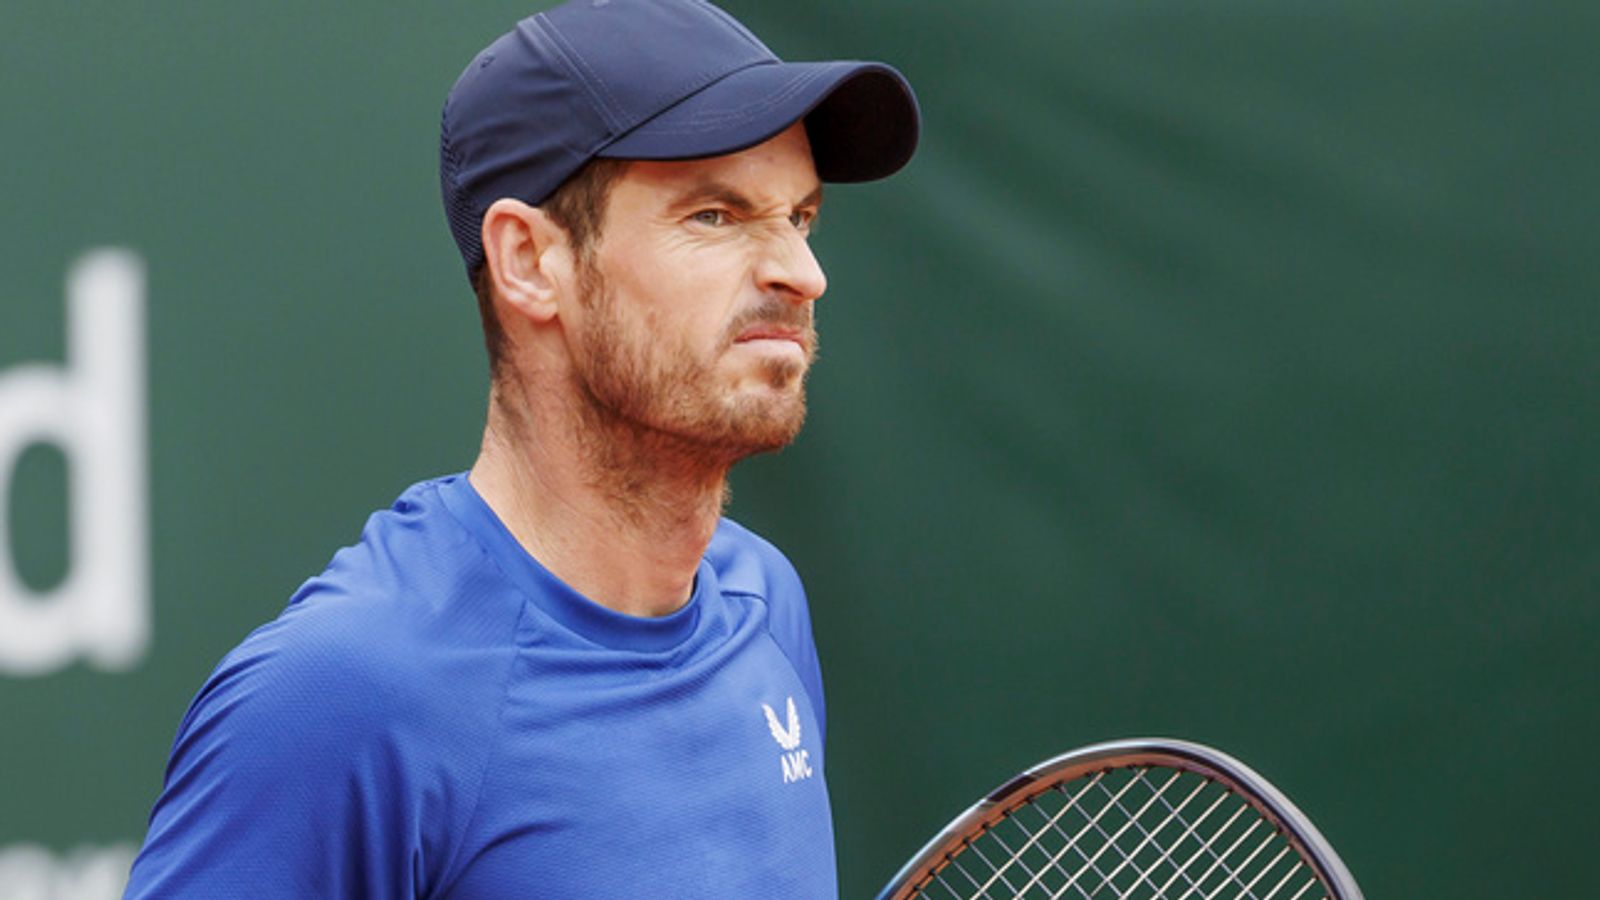 Andy Murray on brink of defeat against Yannick Hanfmann as match suspended at Geneva Open | Tennis News | Sky Sports thumbnail